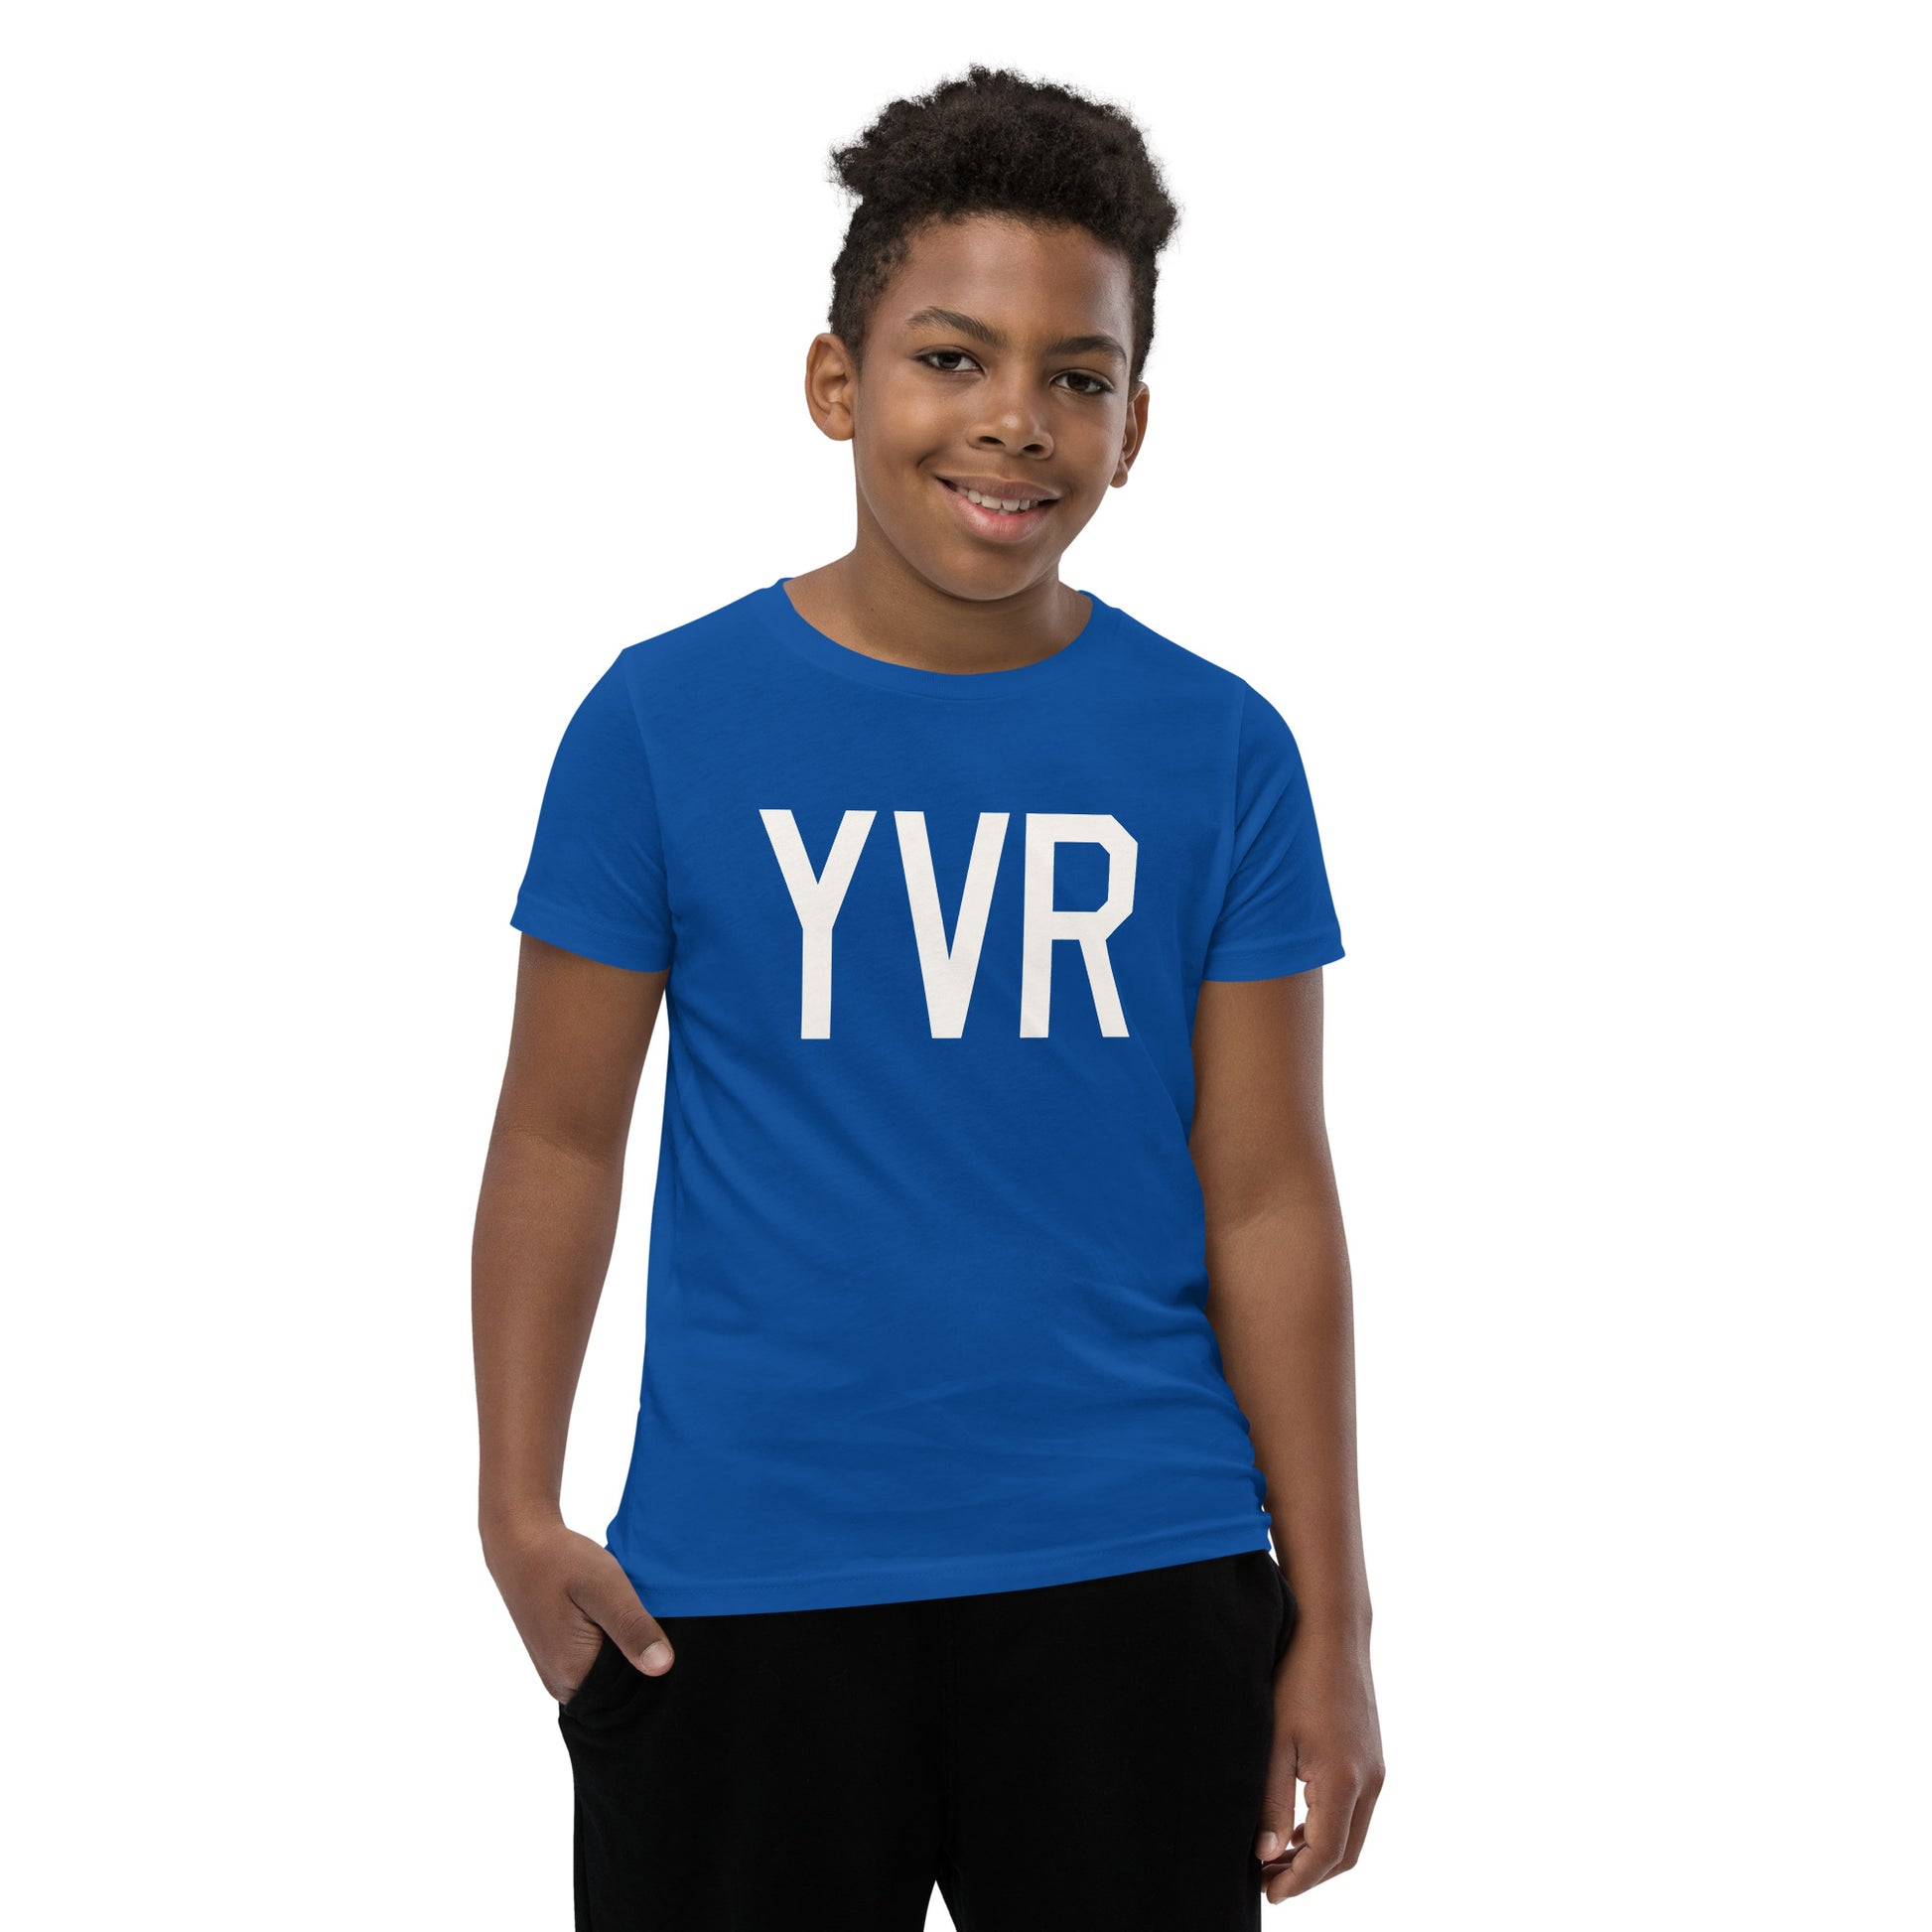 Kid's T-Shirt - White Graphic • YVR Vancouver • YHM Designs - Image 11